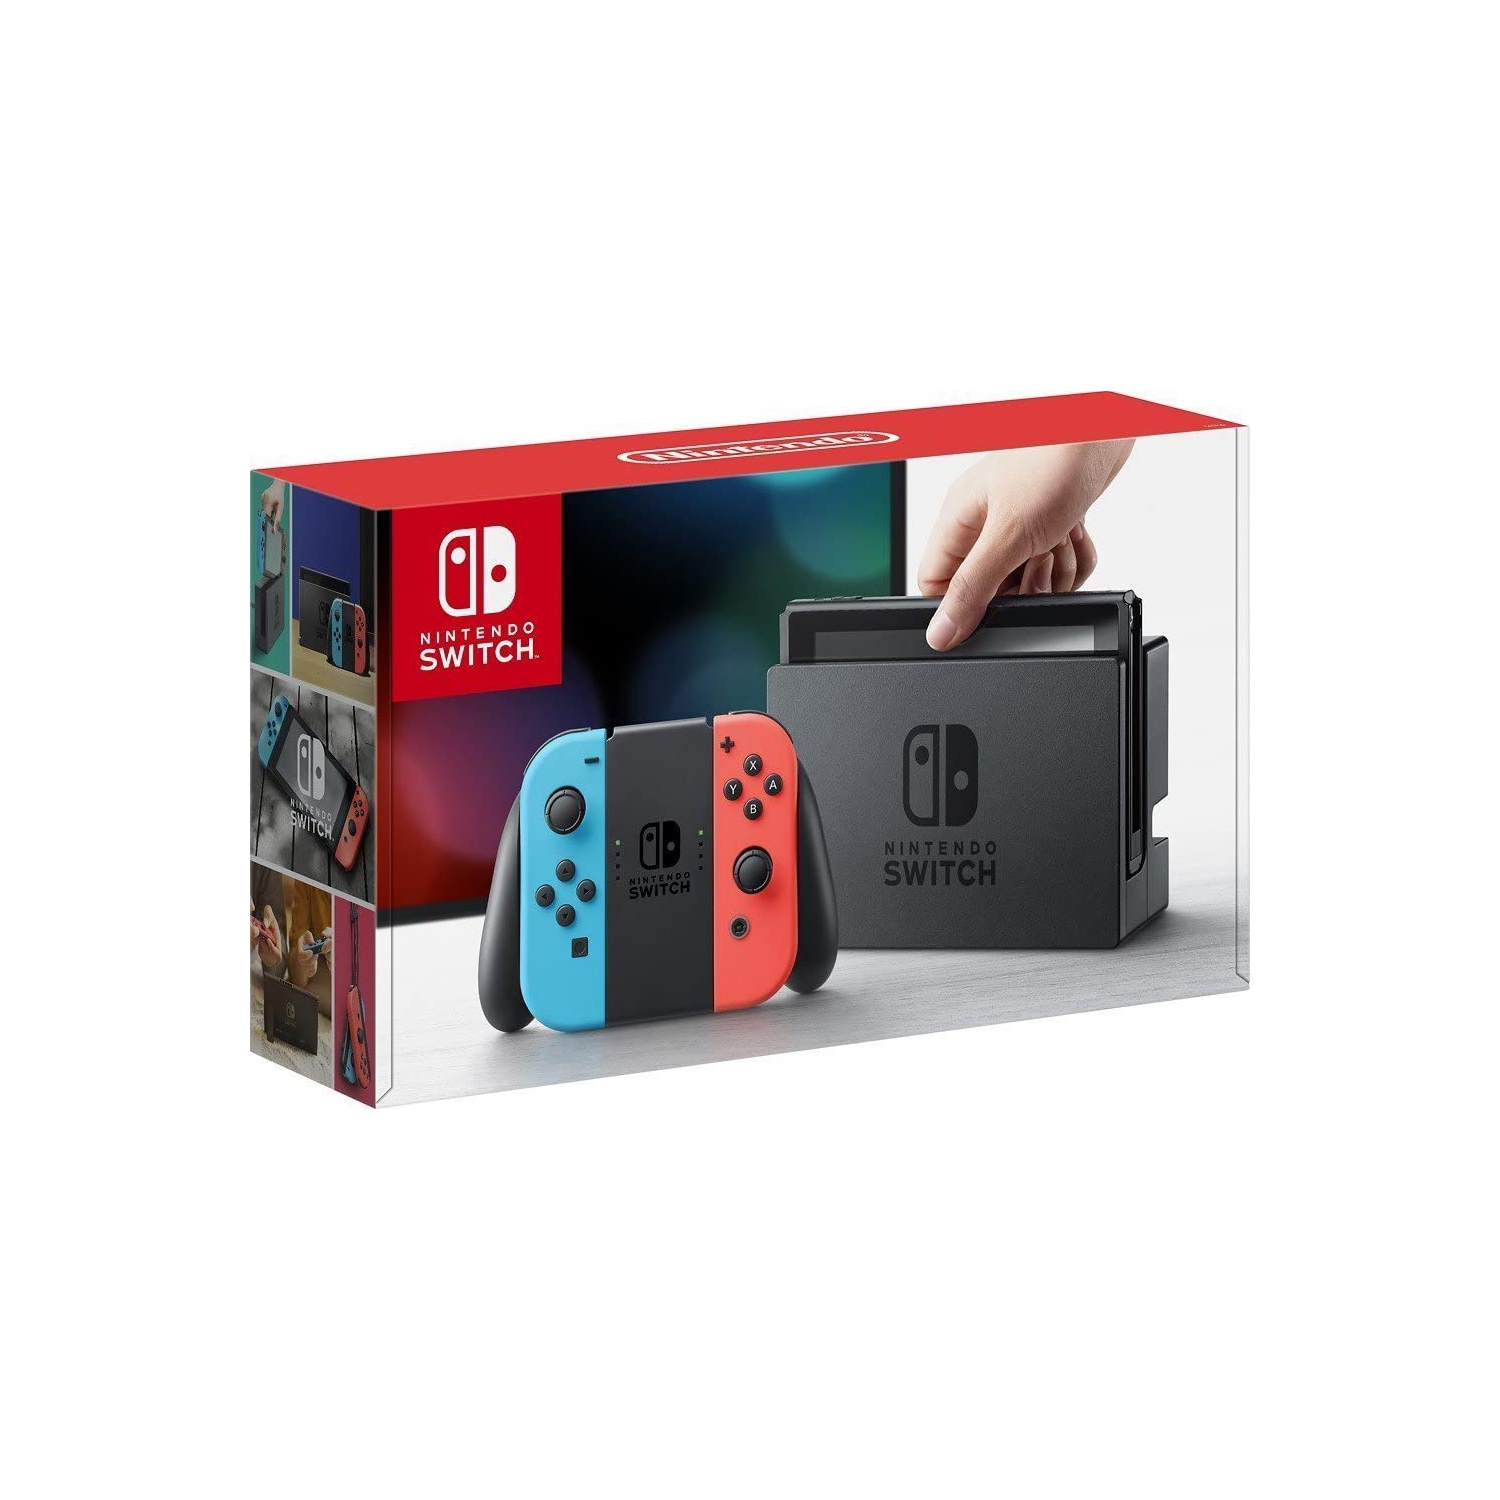 Nintendo Switch with Neon Blue and Neon Red Joy-Con - HAC-001(-01)